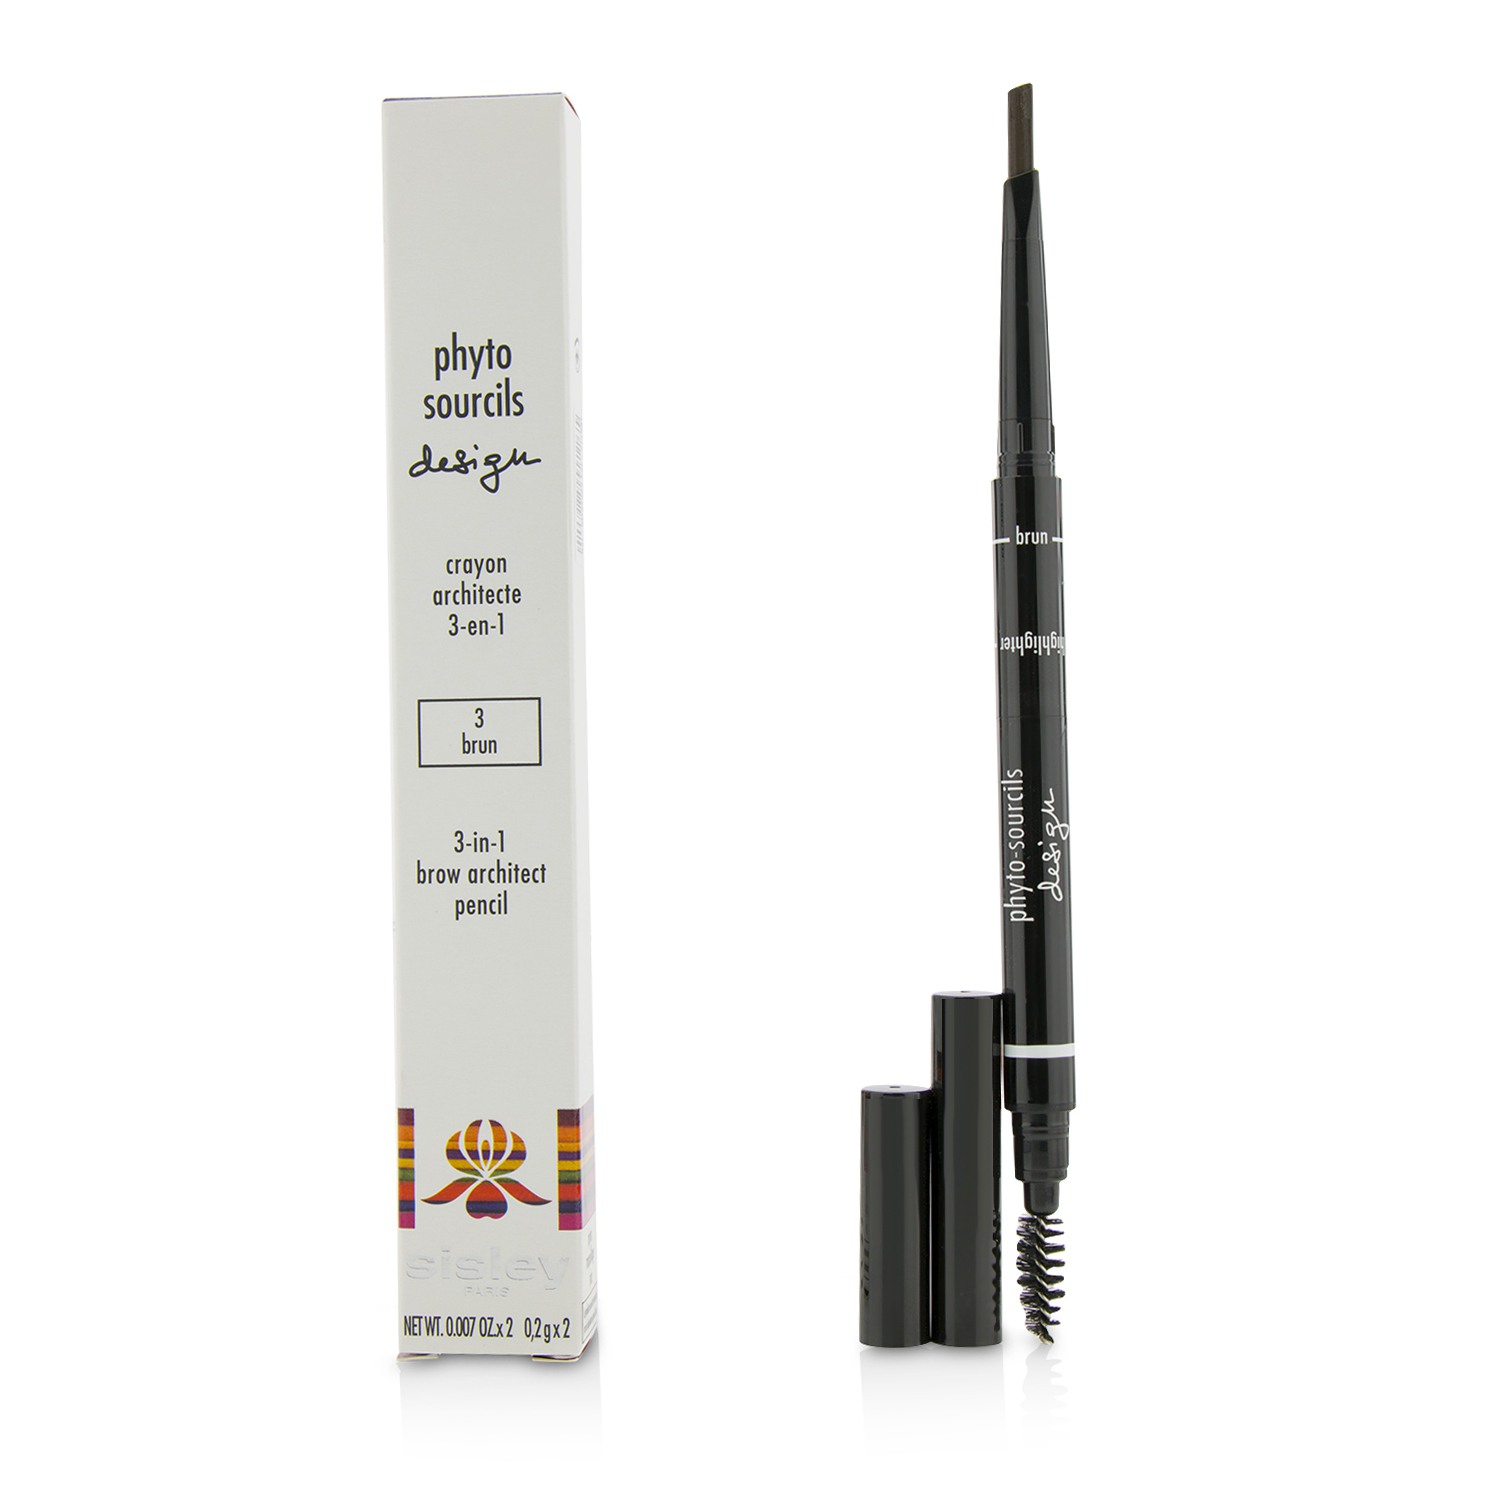 Phyto Sourcils Design 3 In 1 Brow Architect Pencil - # 3 Brun Sisley Image